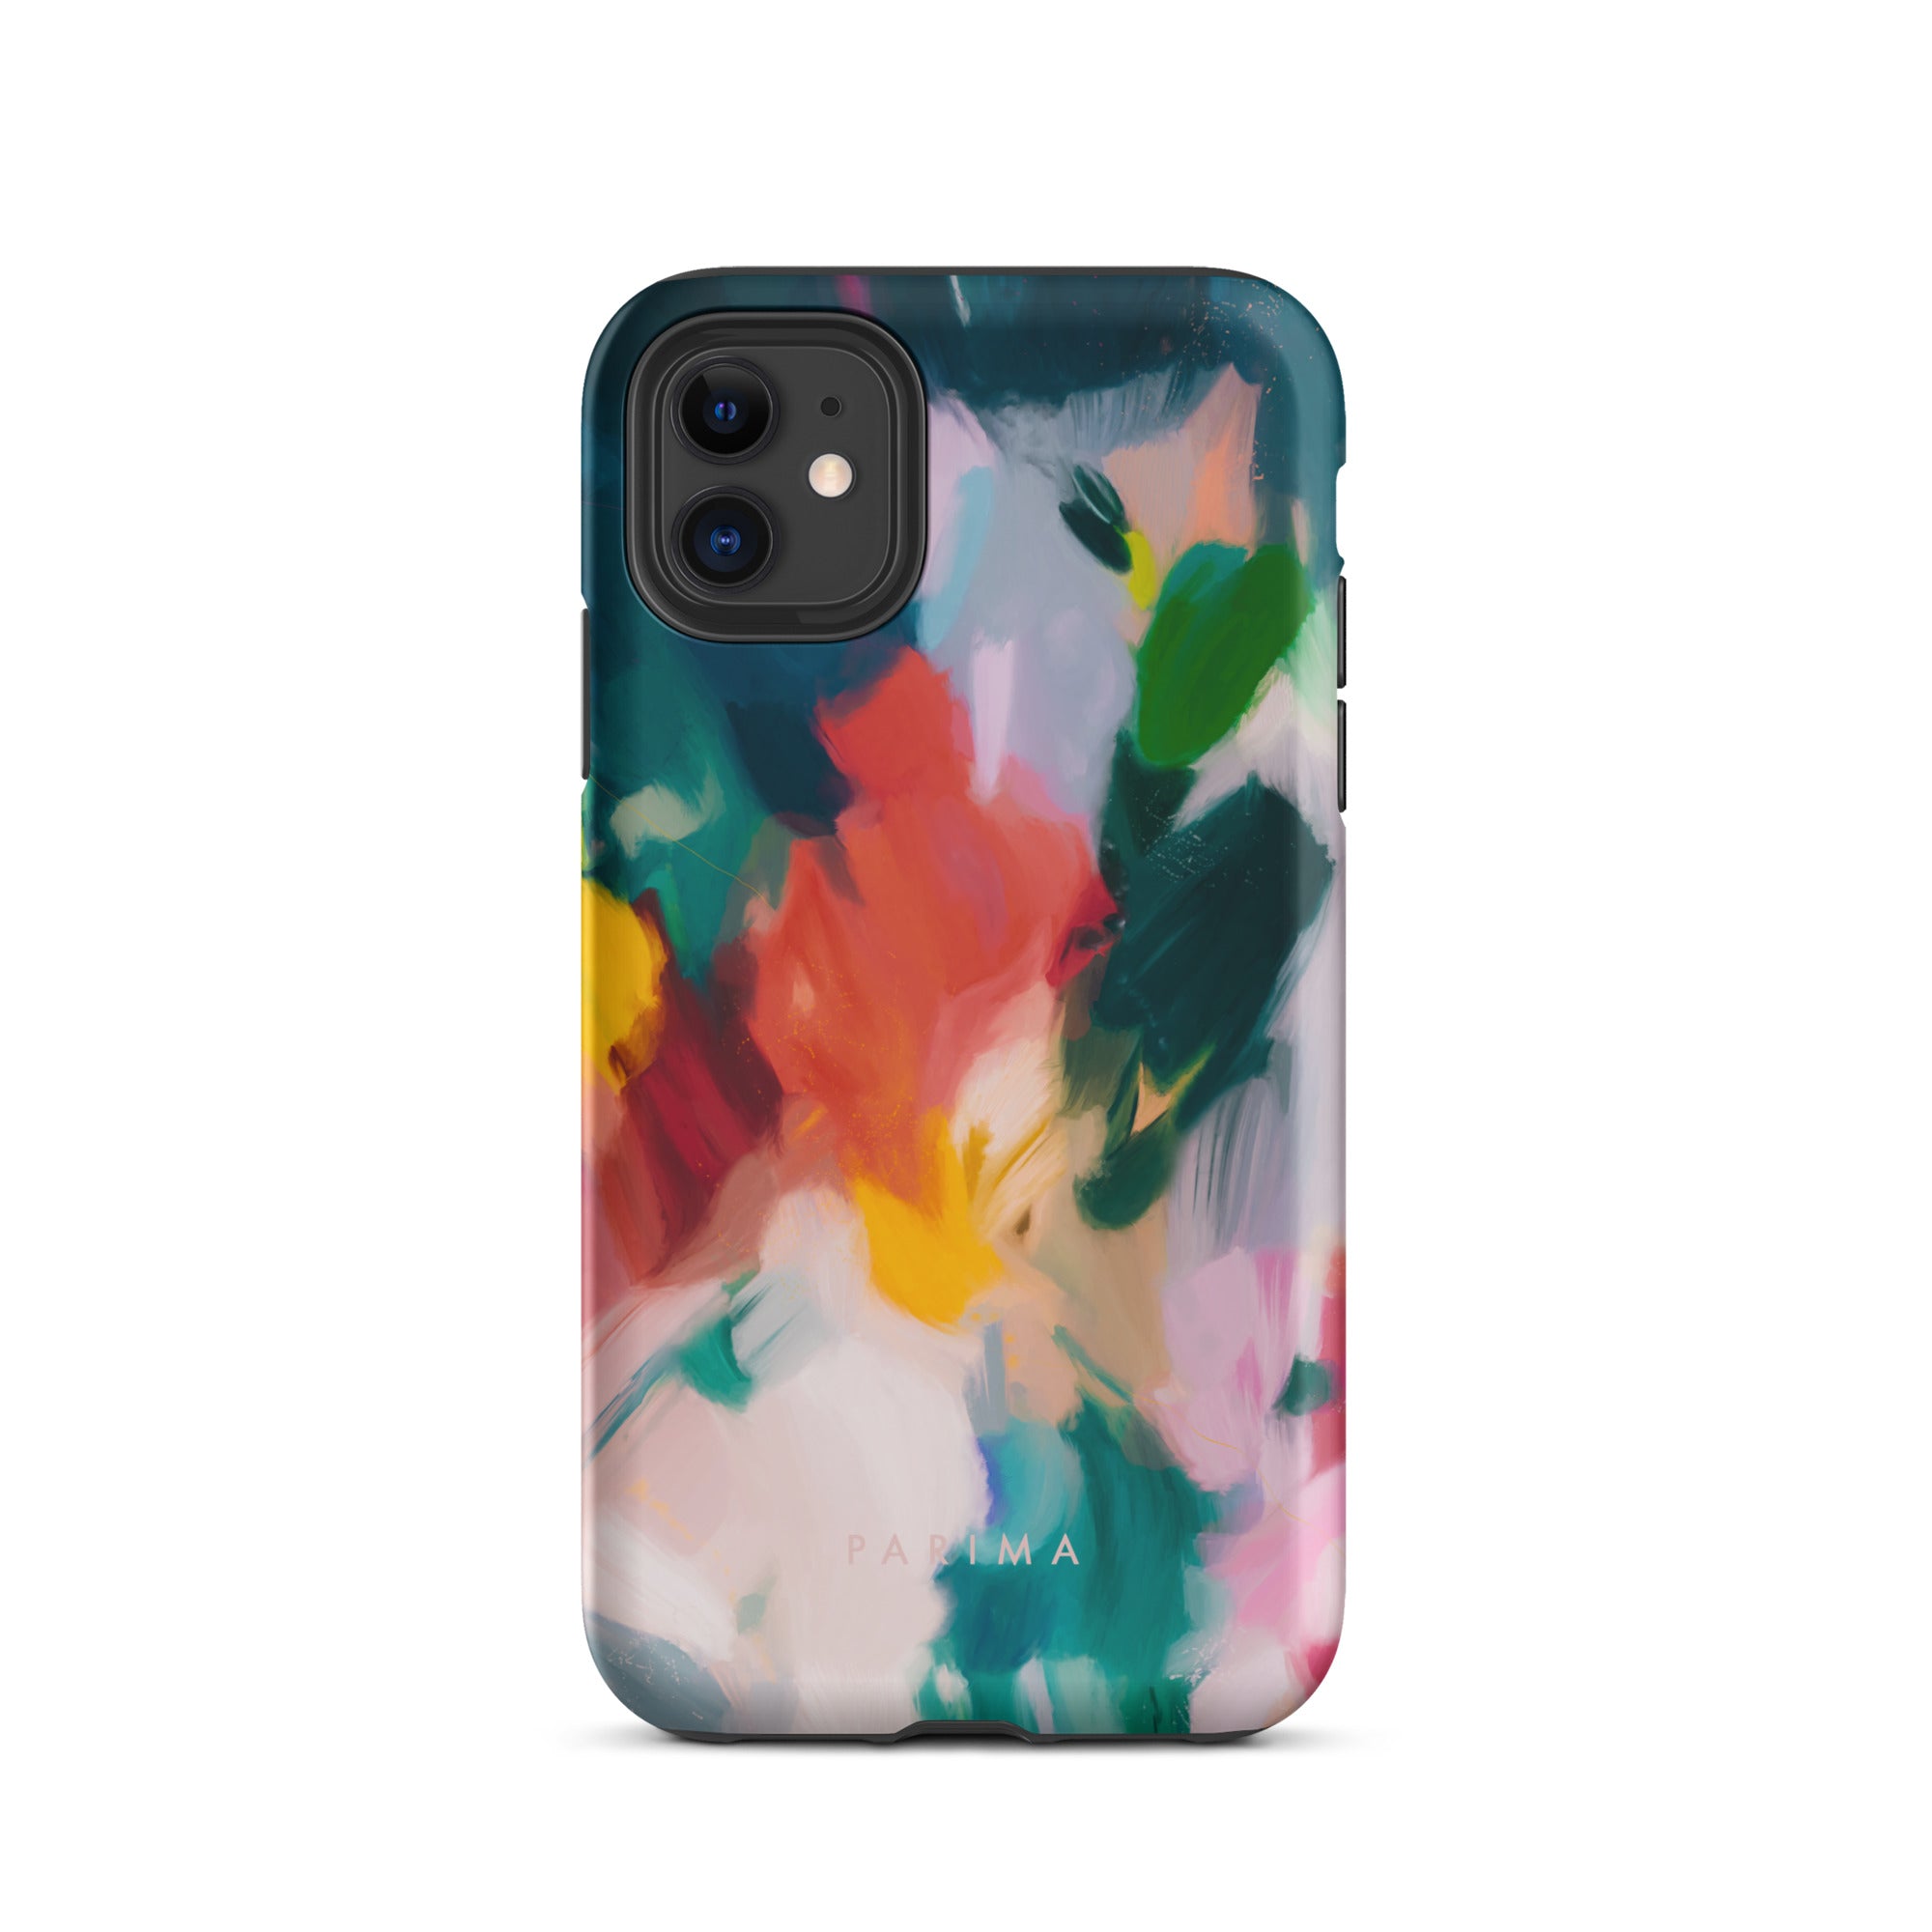 Pomme, blue and red abstract art on iPhone 11 tough case by Parima Studio